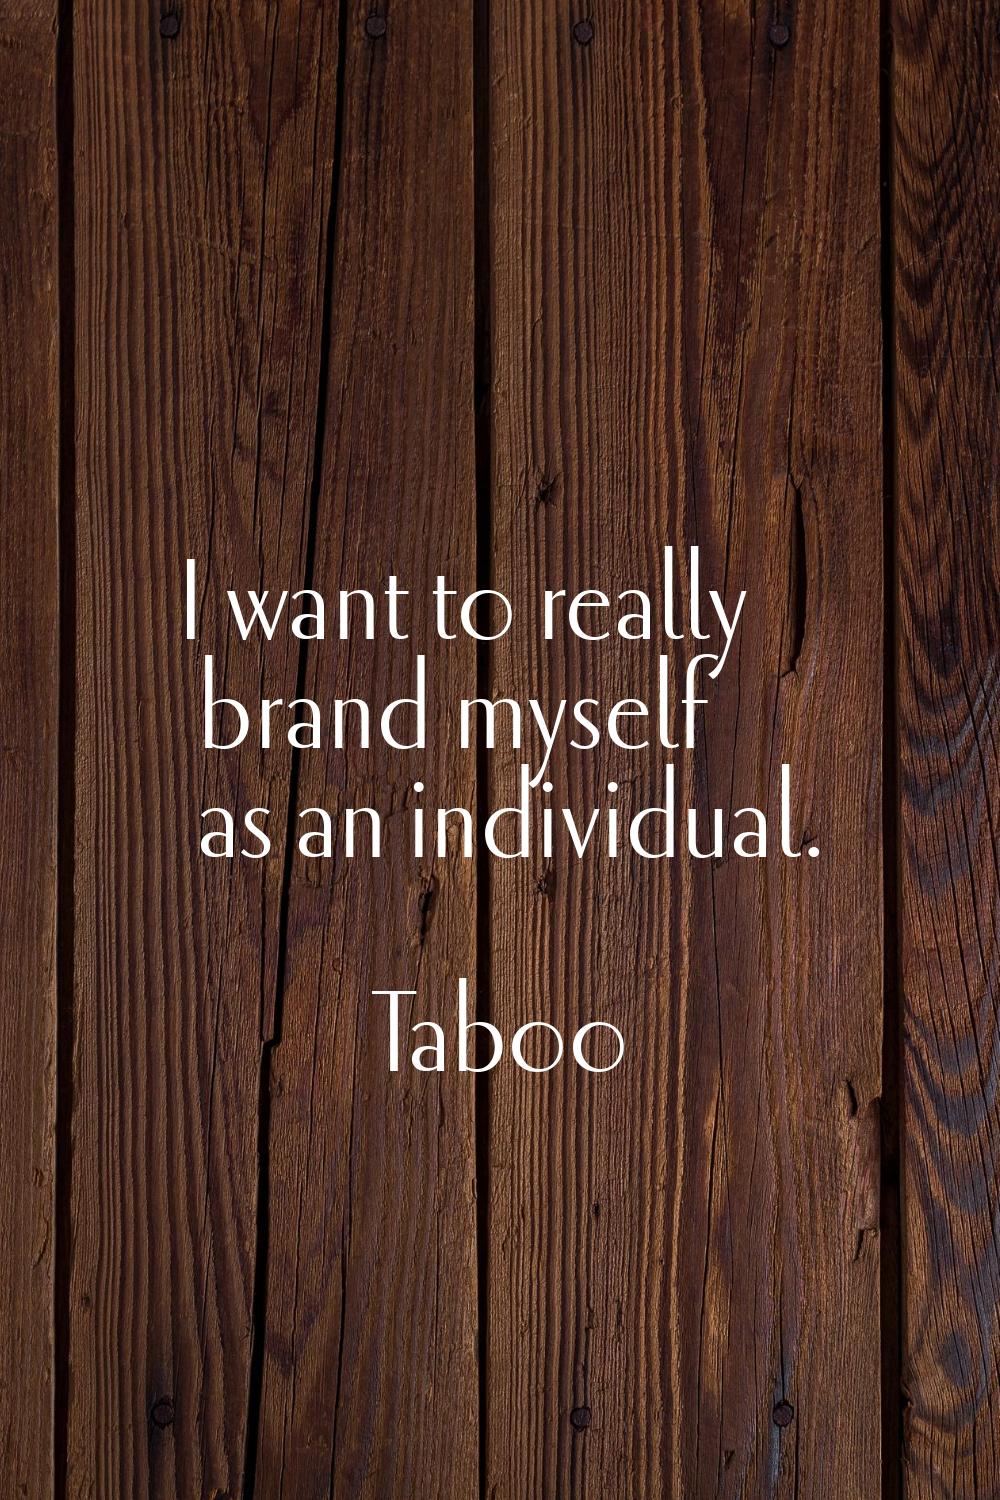 I want to really brand myself as an individual.